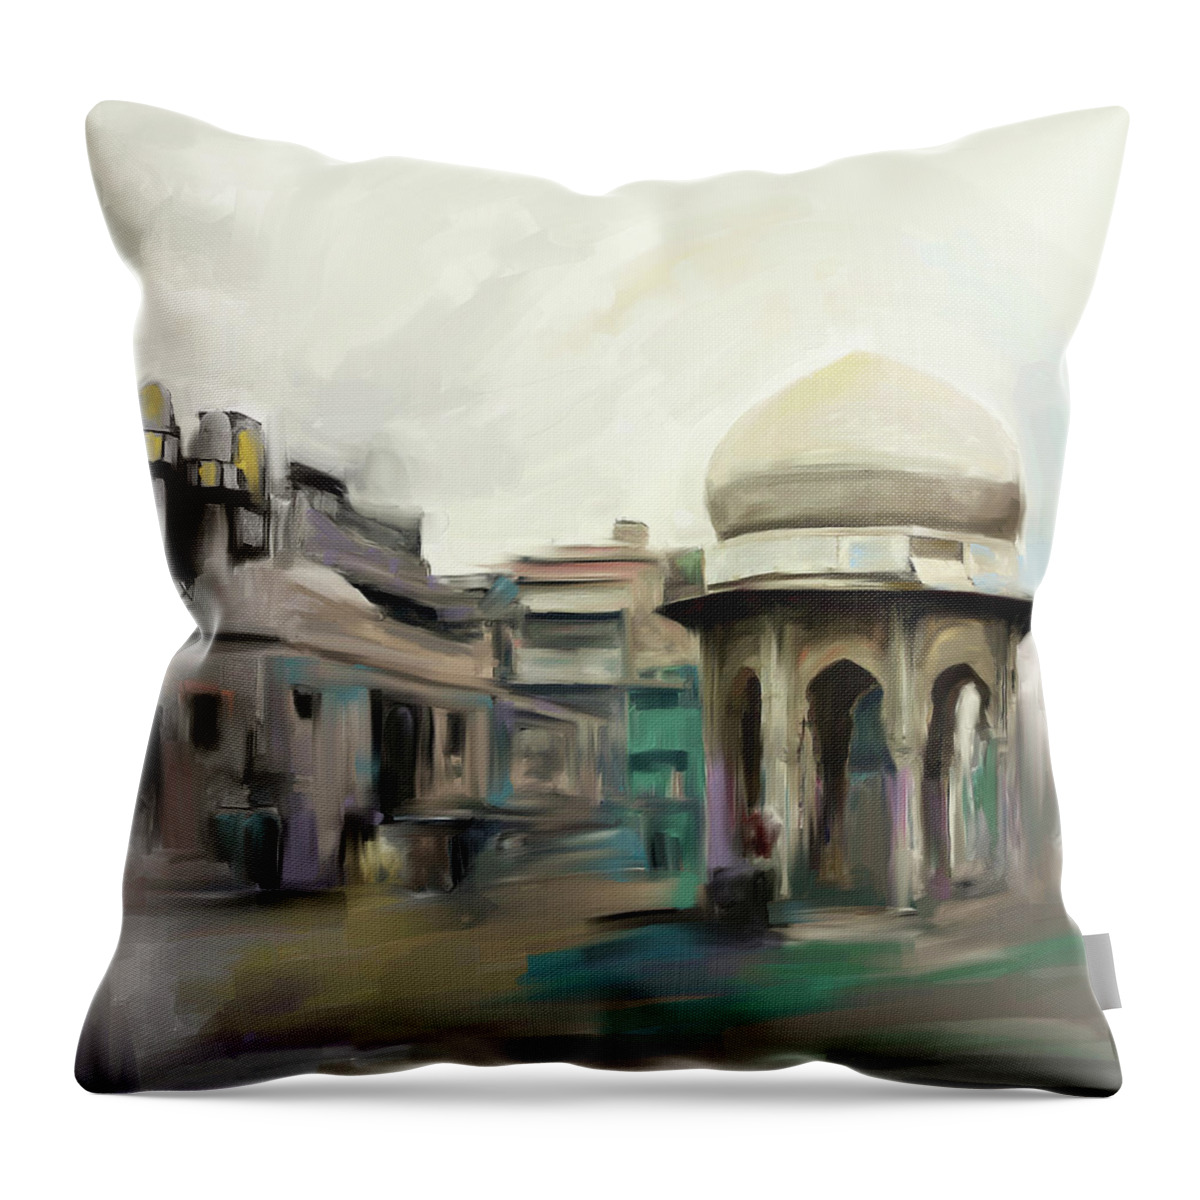 Chowk Yaadgar Throw Pillow featuring the painting Painting 798 1 Chowk Yadgaar by Mawra Tahreem